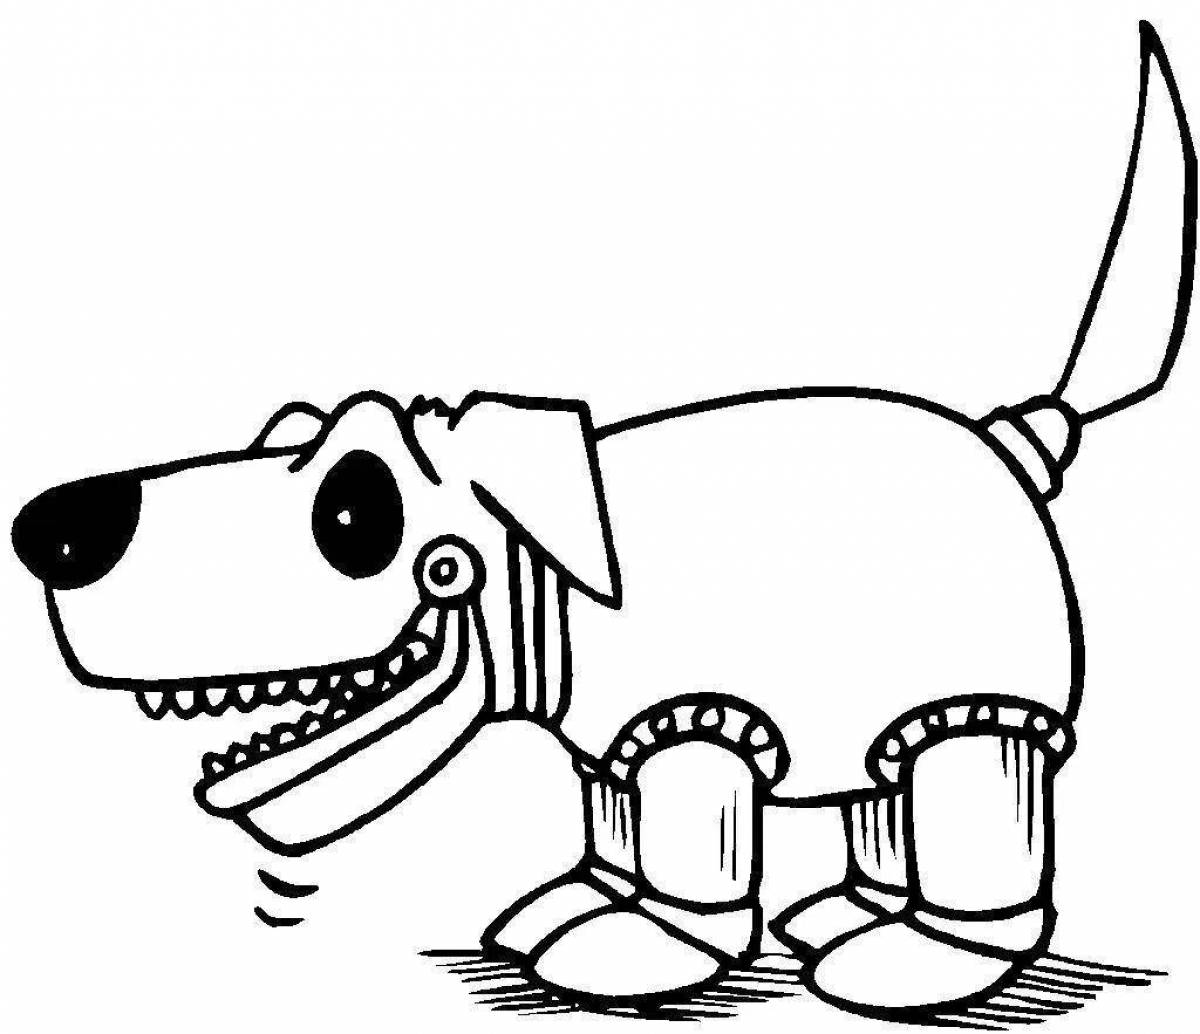 Robodog awesome coloring book